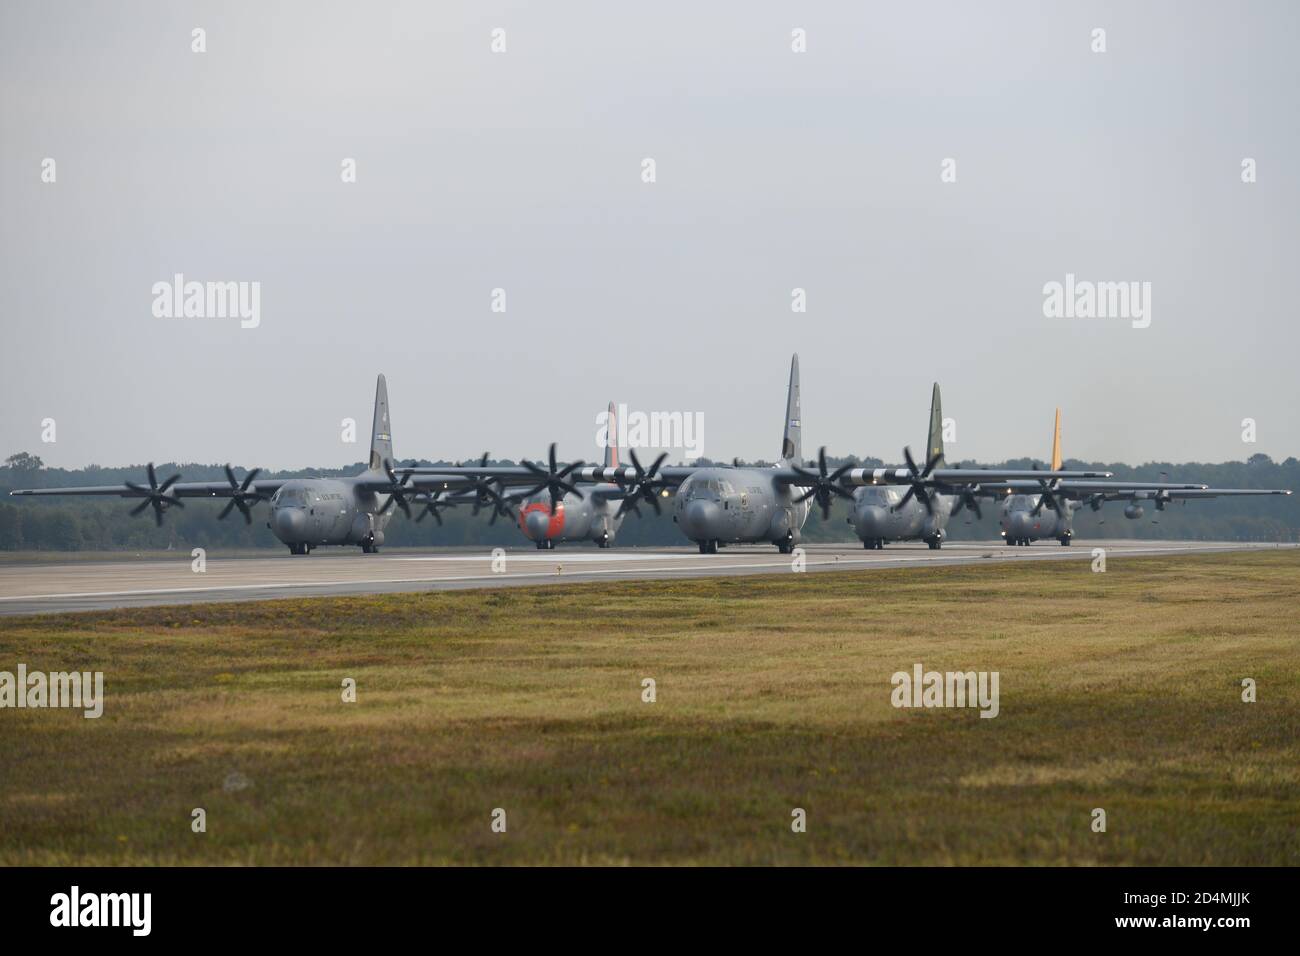 C-130s taxi on the flight line in celebration of the 65th anniversary of the base’s first open house at Little Rock Air Force Base, Arkansas, Oct. 8, 2020. The display of heritage aircraft honored local Arkansans for their unwavering support since 1955. (U.S. Air Force photo by Airman 1st Class Mariam K. Springs) Stock Photo